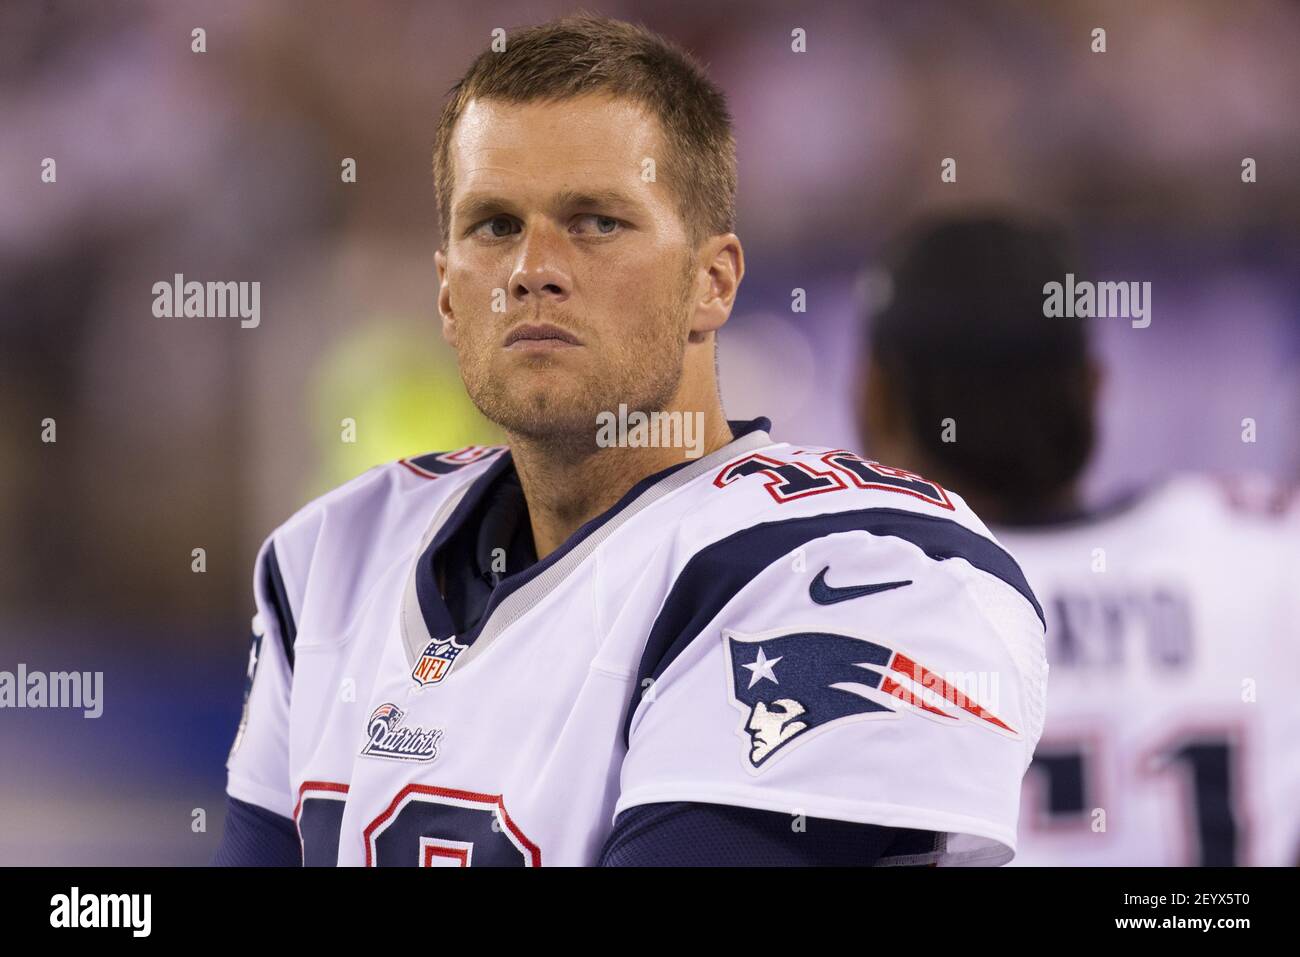 29 August 2012 - East Rutherford, New Jersey - New England Patriots  quarterback Tom Brady (12) looks on with his helmet off during the NFL  preseason game between the New England Patriots